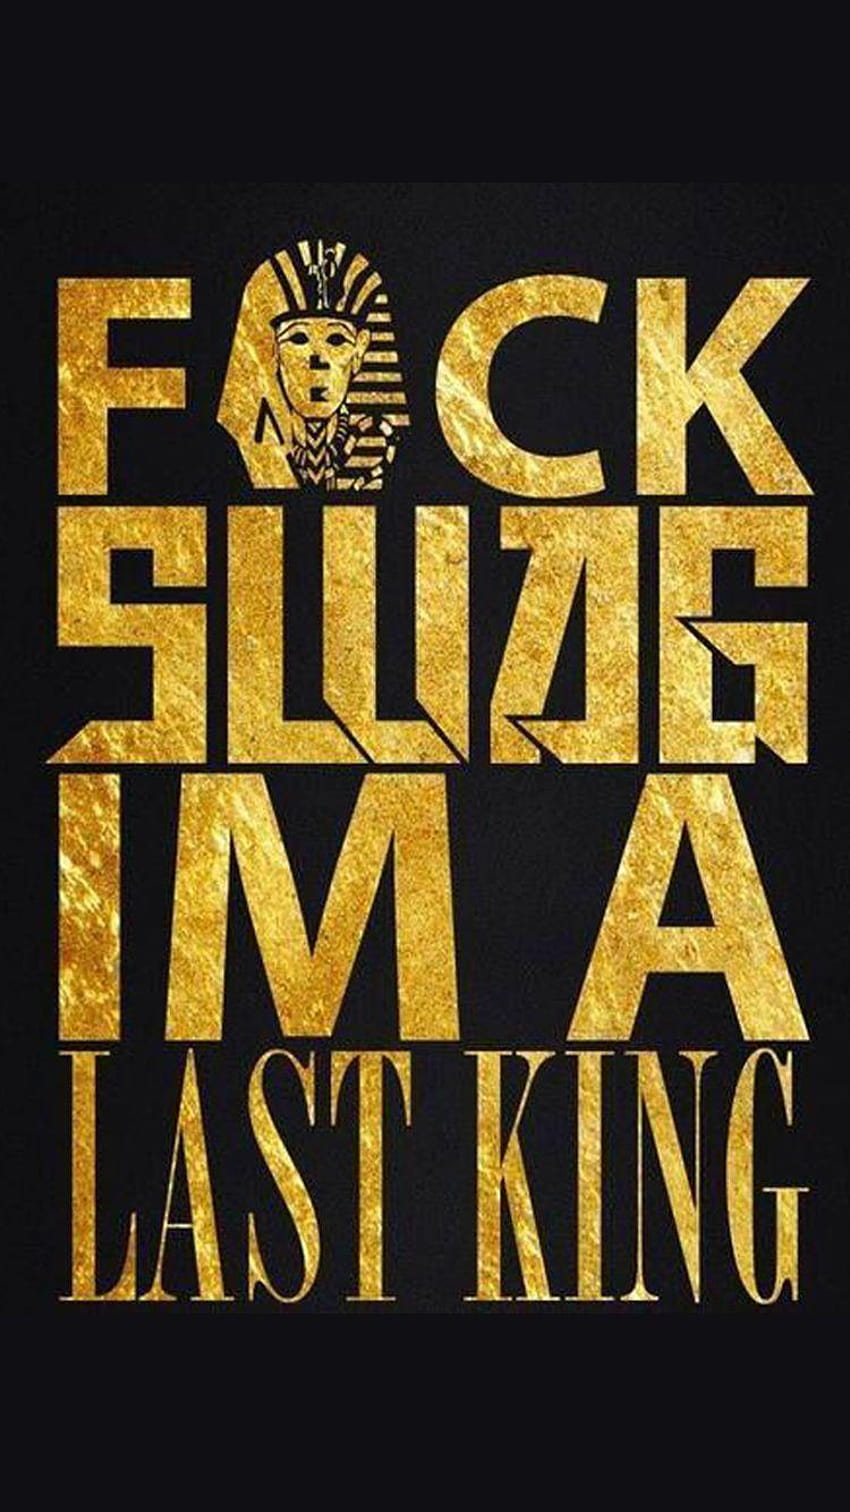 Gold Last Kings for iPhone 7, king of kings HD phone wallpaper